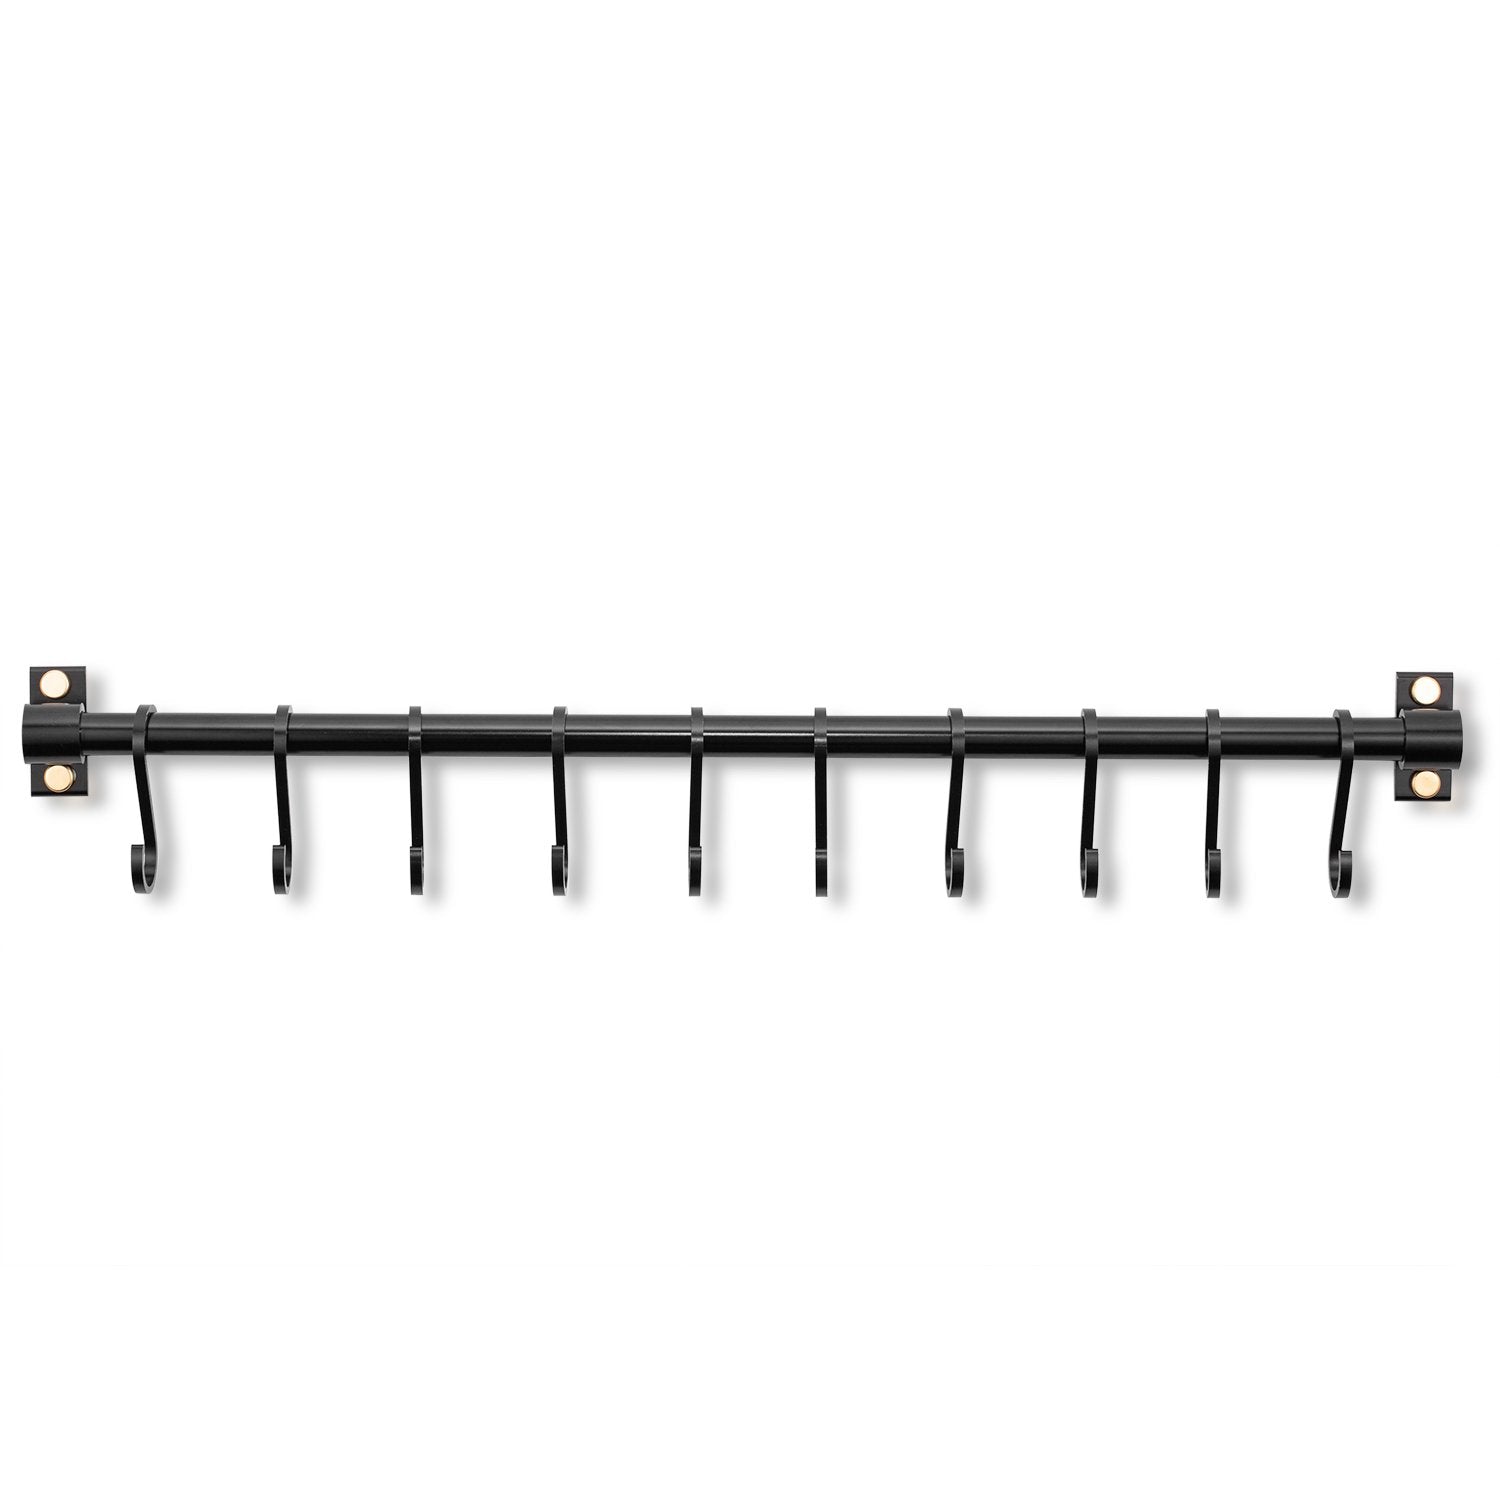 Kitchen Utensil Rack Pot Pan Lid Rail Rack Space Aluminum 23.6inch Long Hanging Organizer With 10 Removable S-Shape Hooks Black Wall Mounted